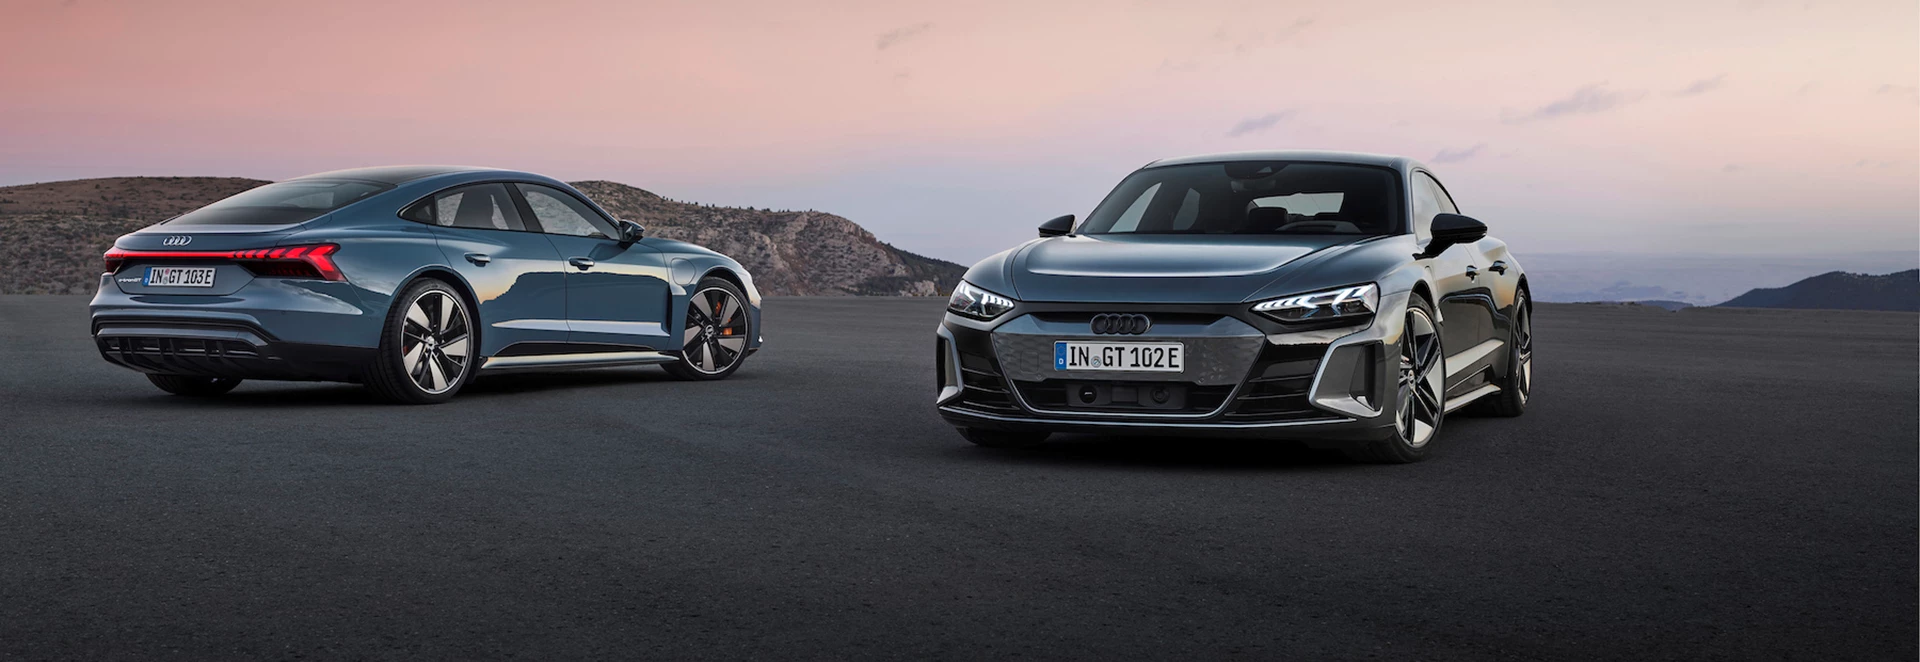 Electric Audi e-tron GT revealed as striking new performance four-door coupe 